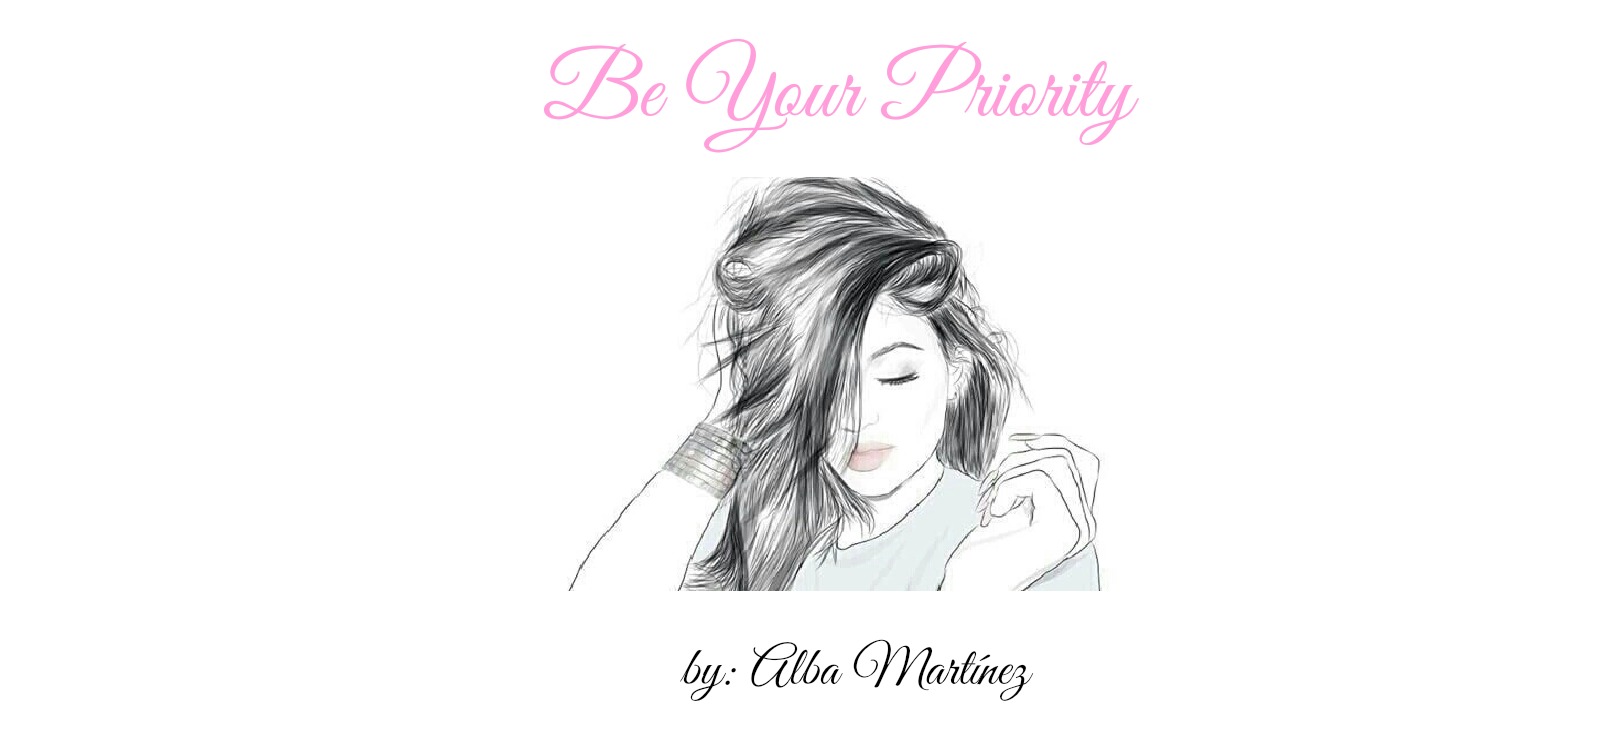 Be Your Priority